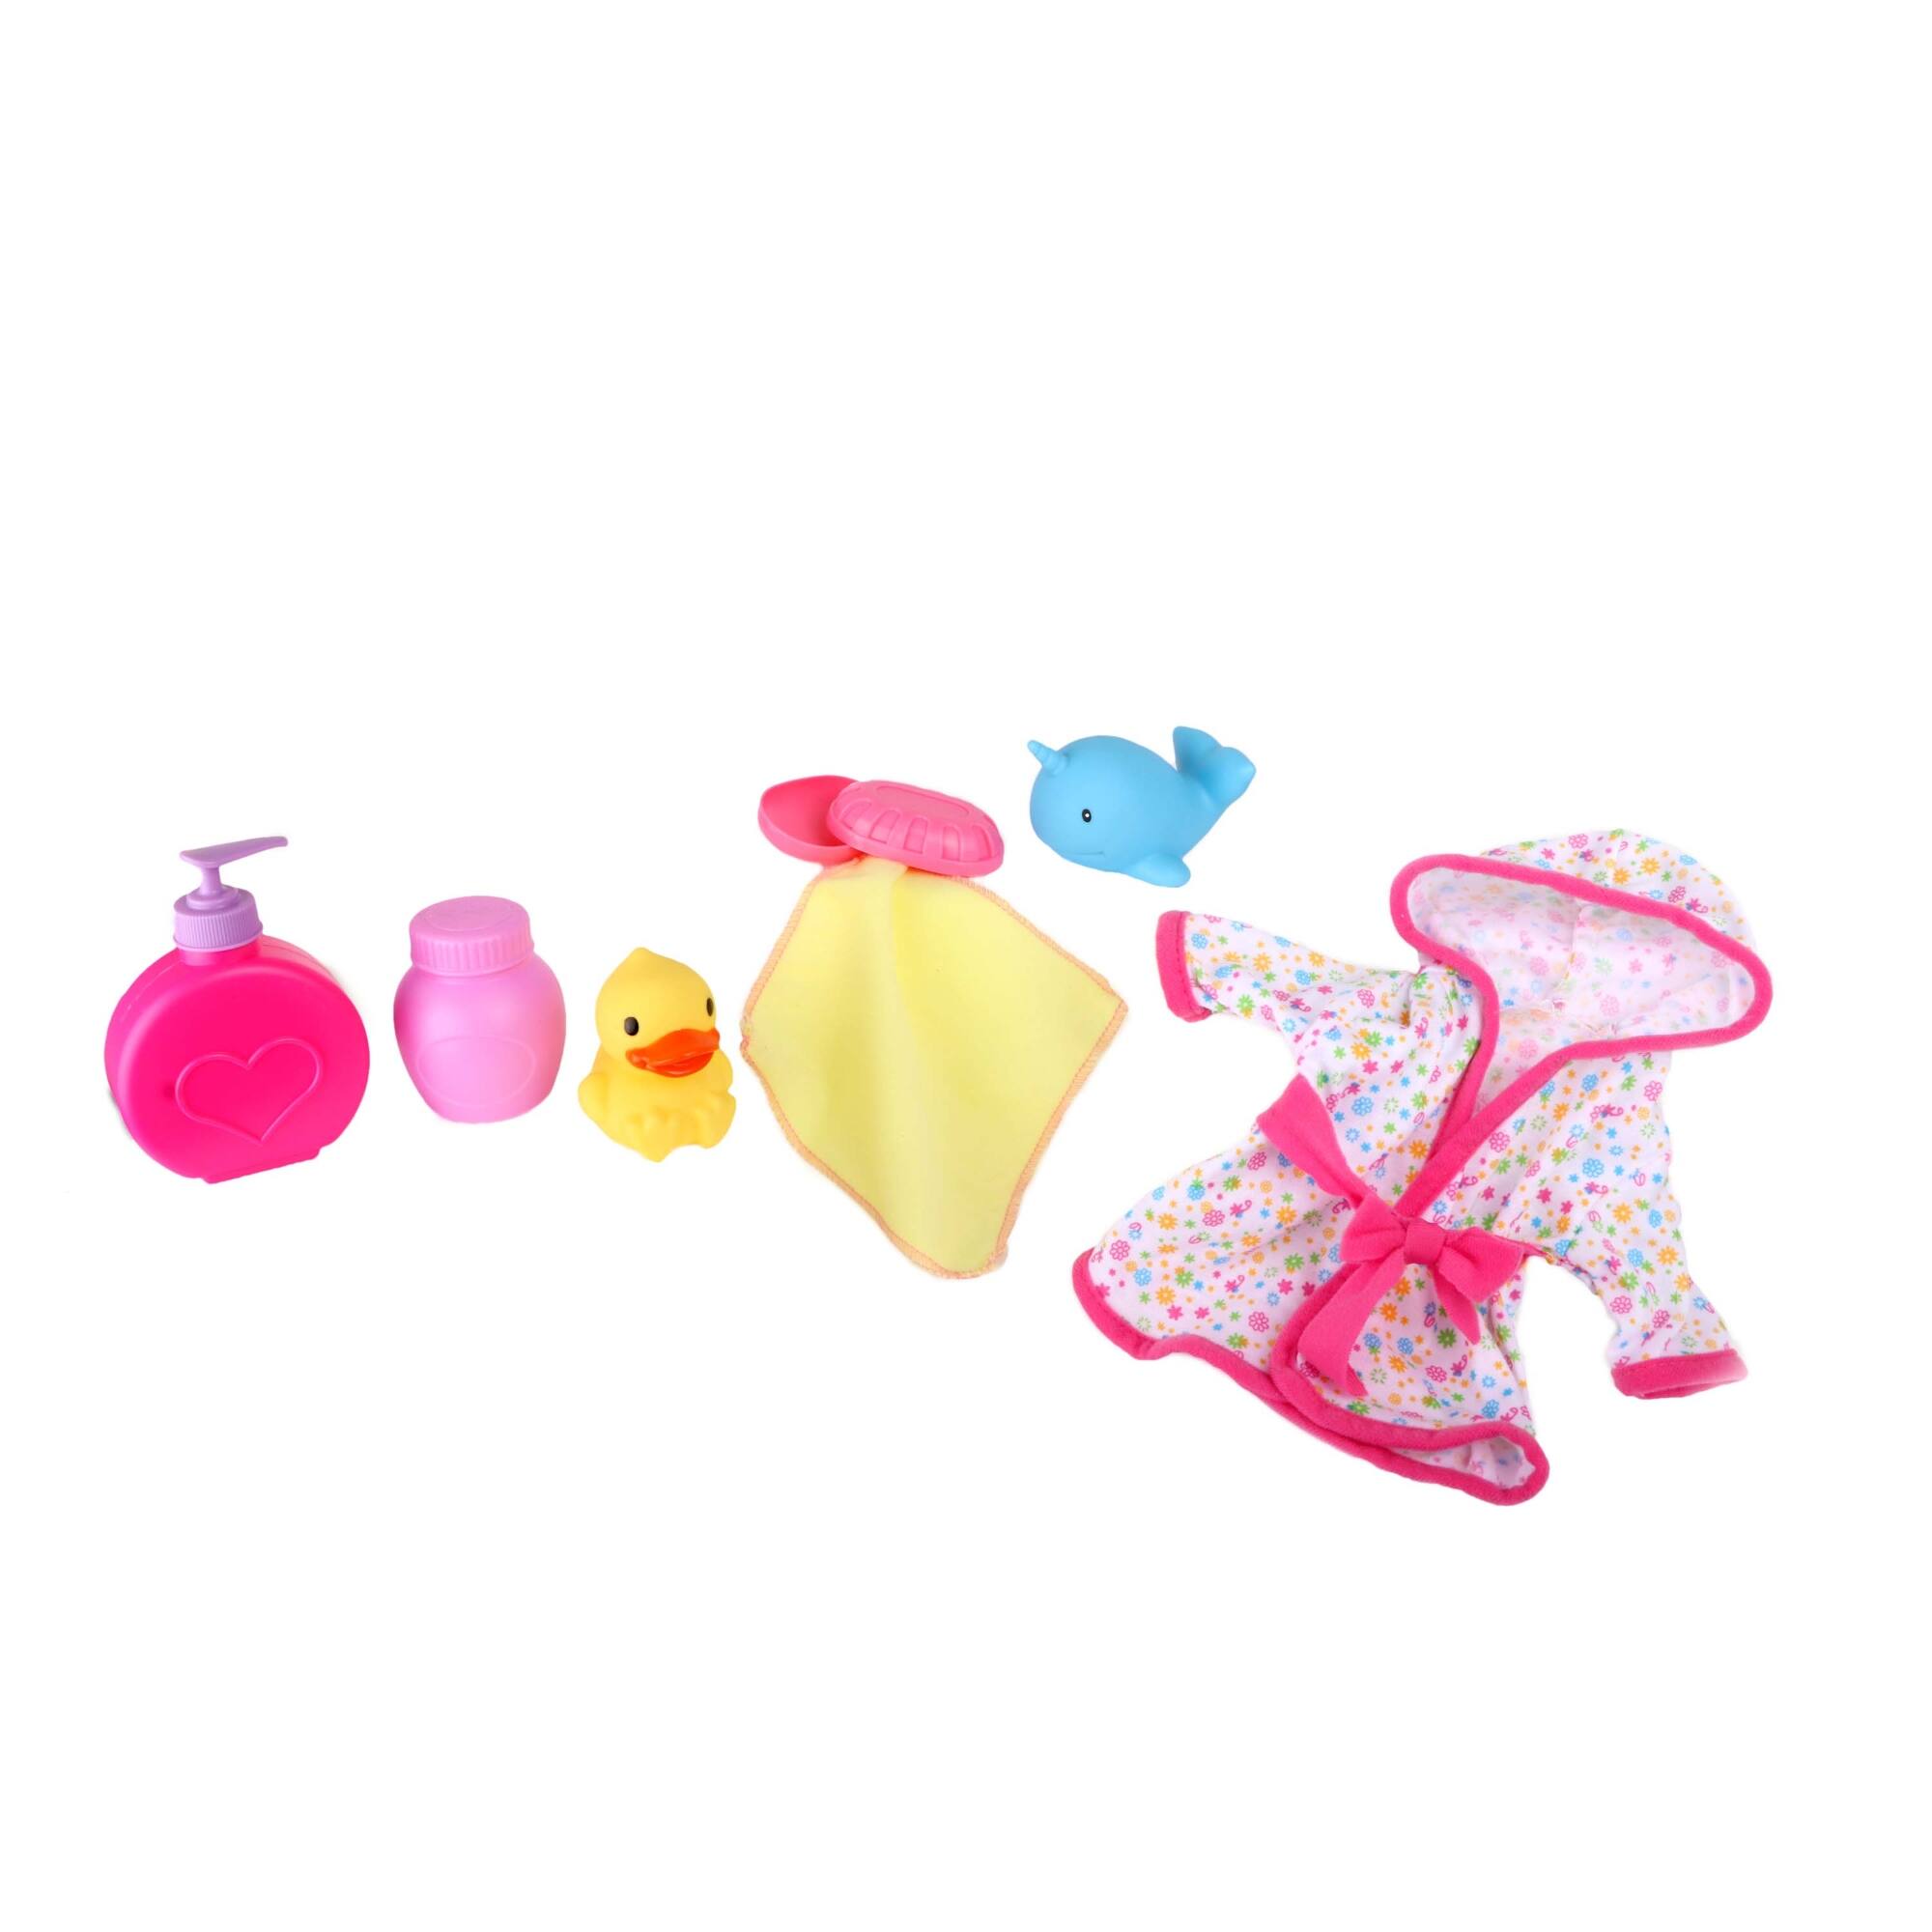 Dream Collection 12 Baby Bath Time Play Set Toy